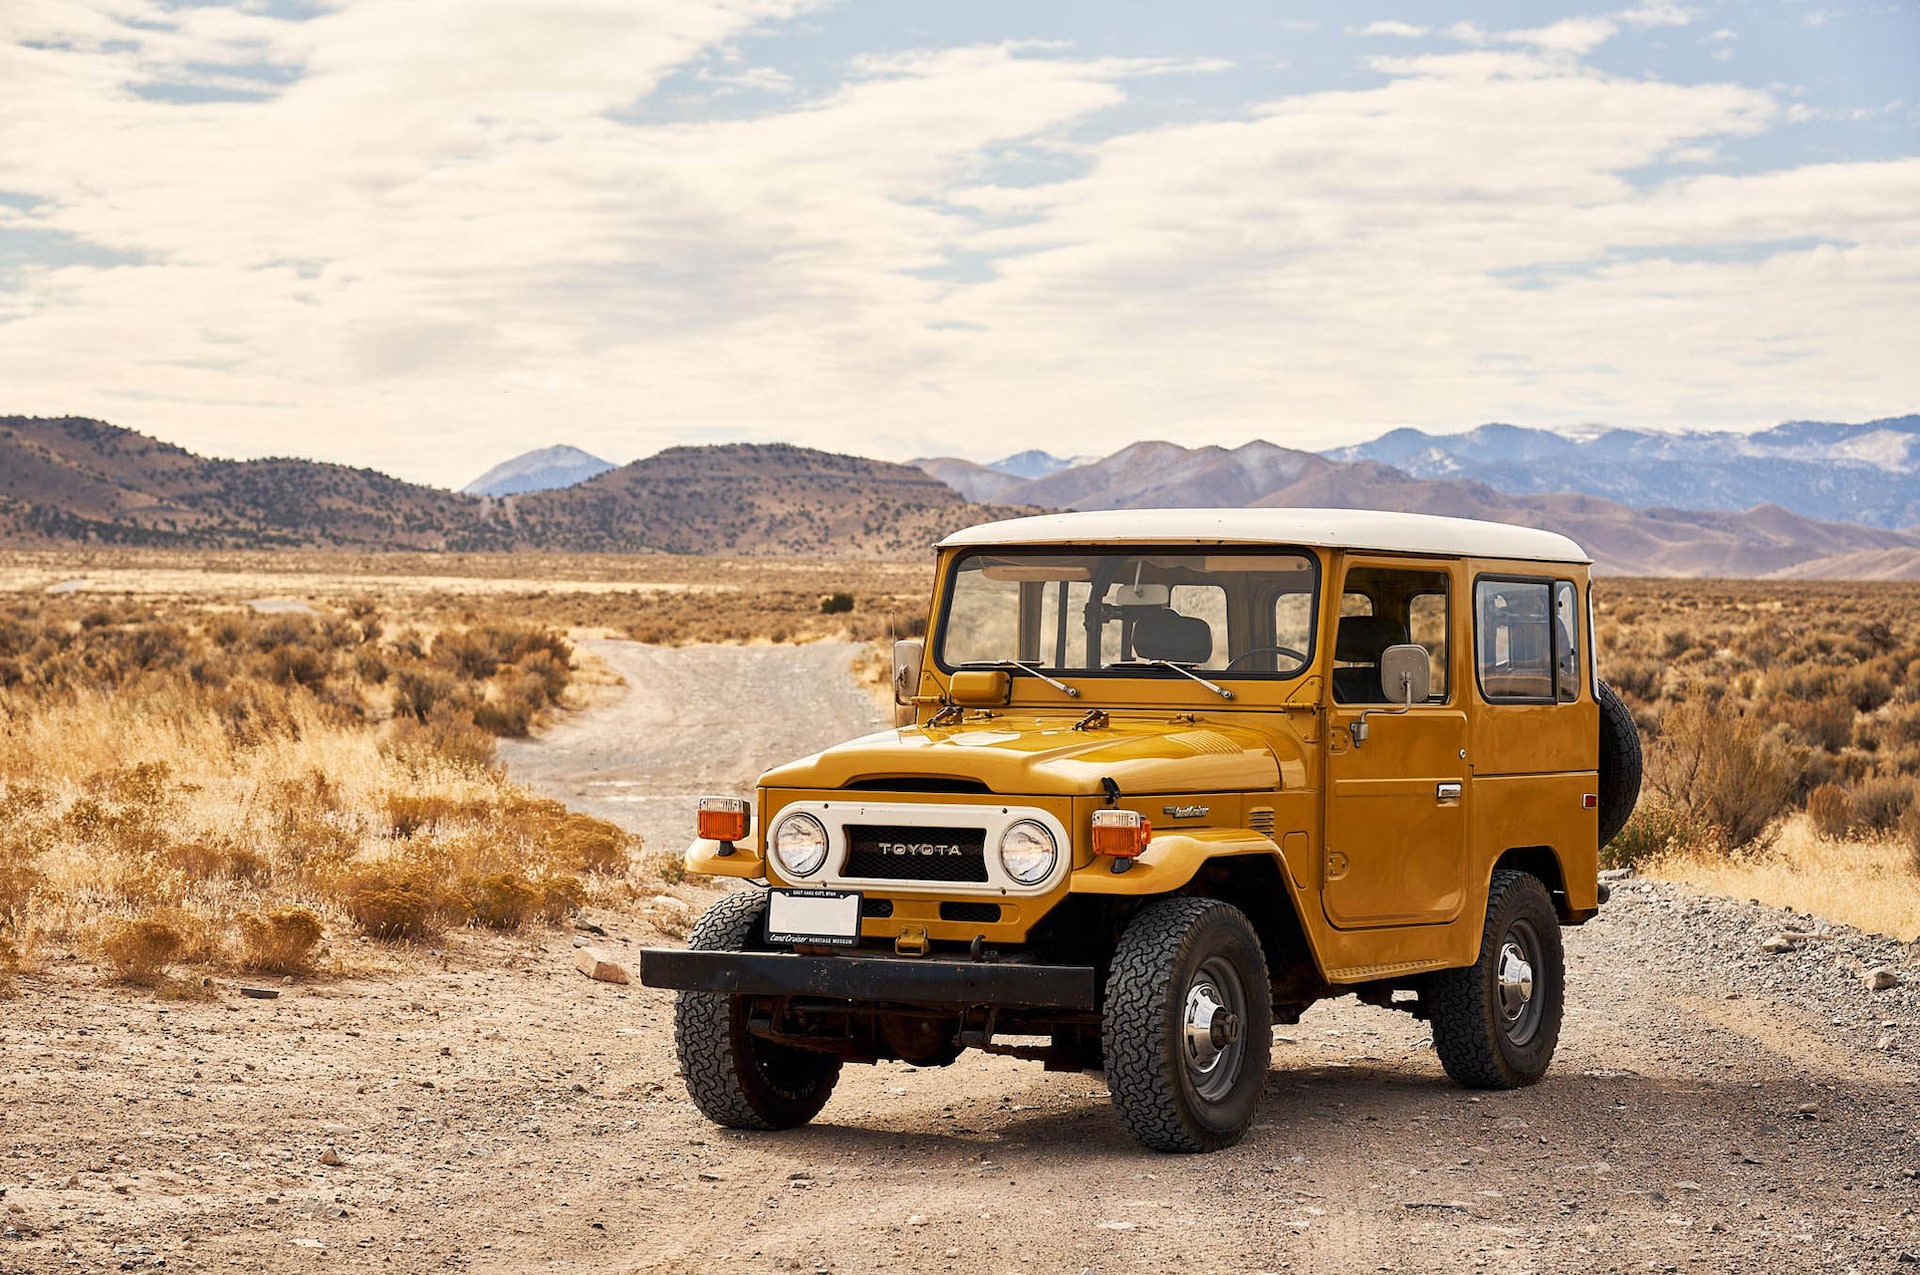 We Drive Five Vintage Land Cruiser SUVs with Toyota